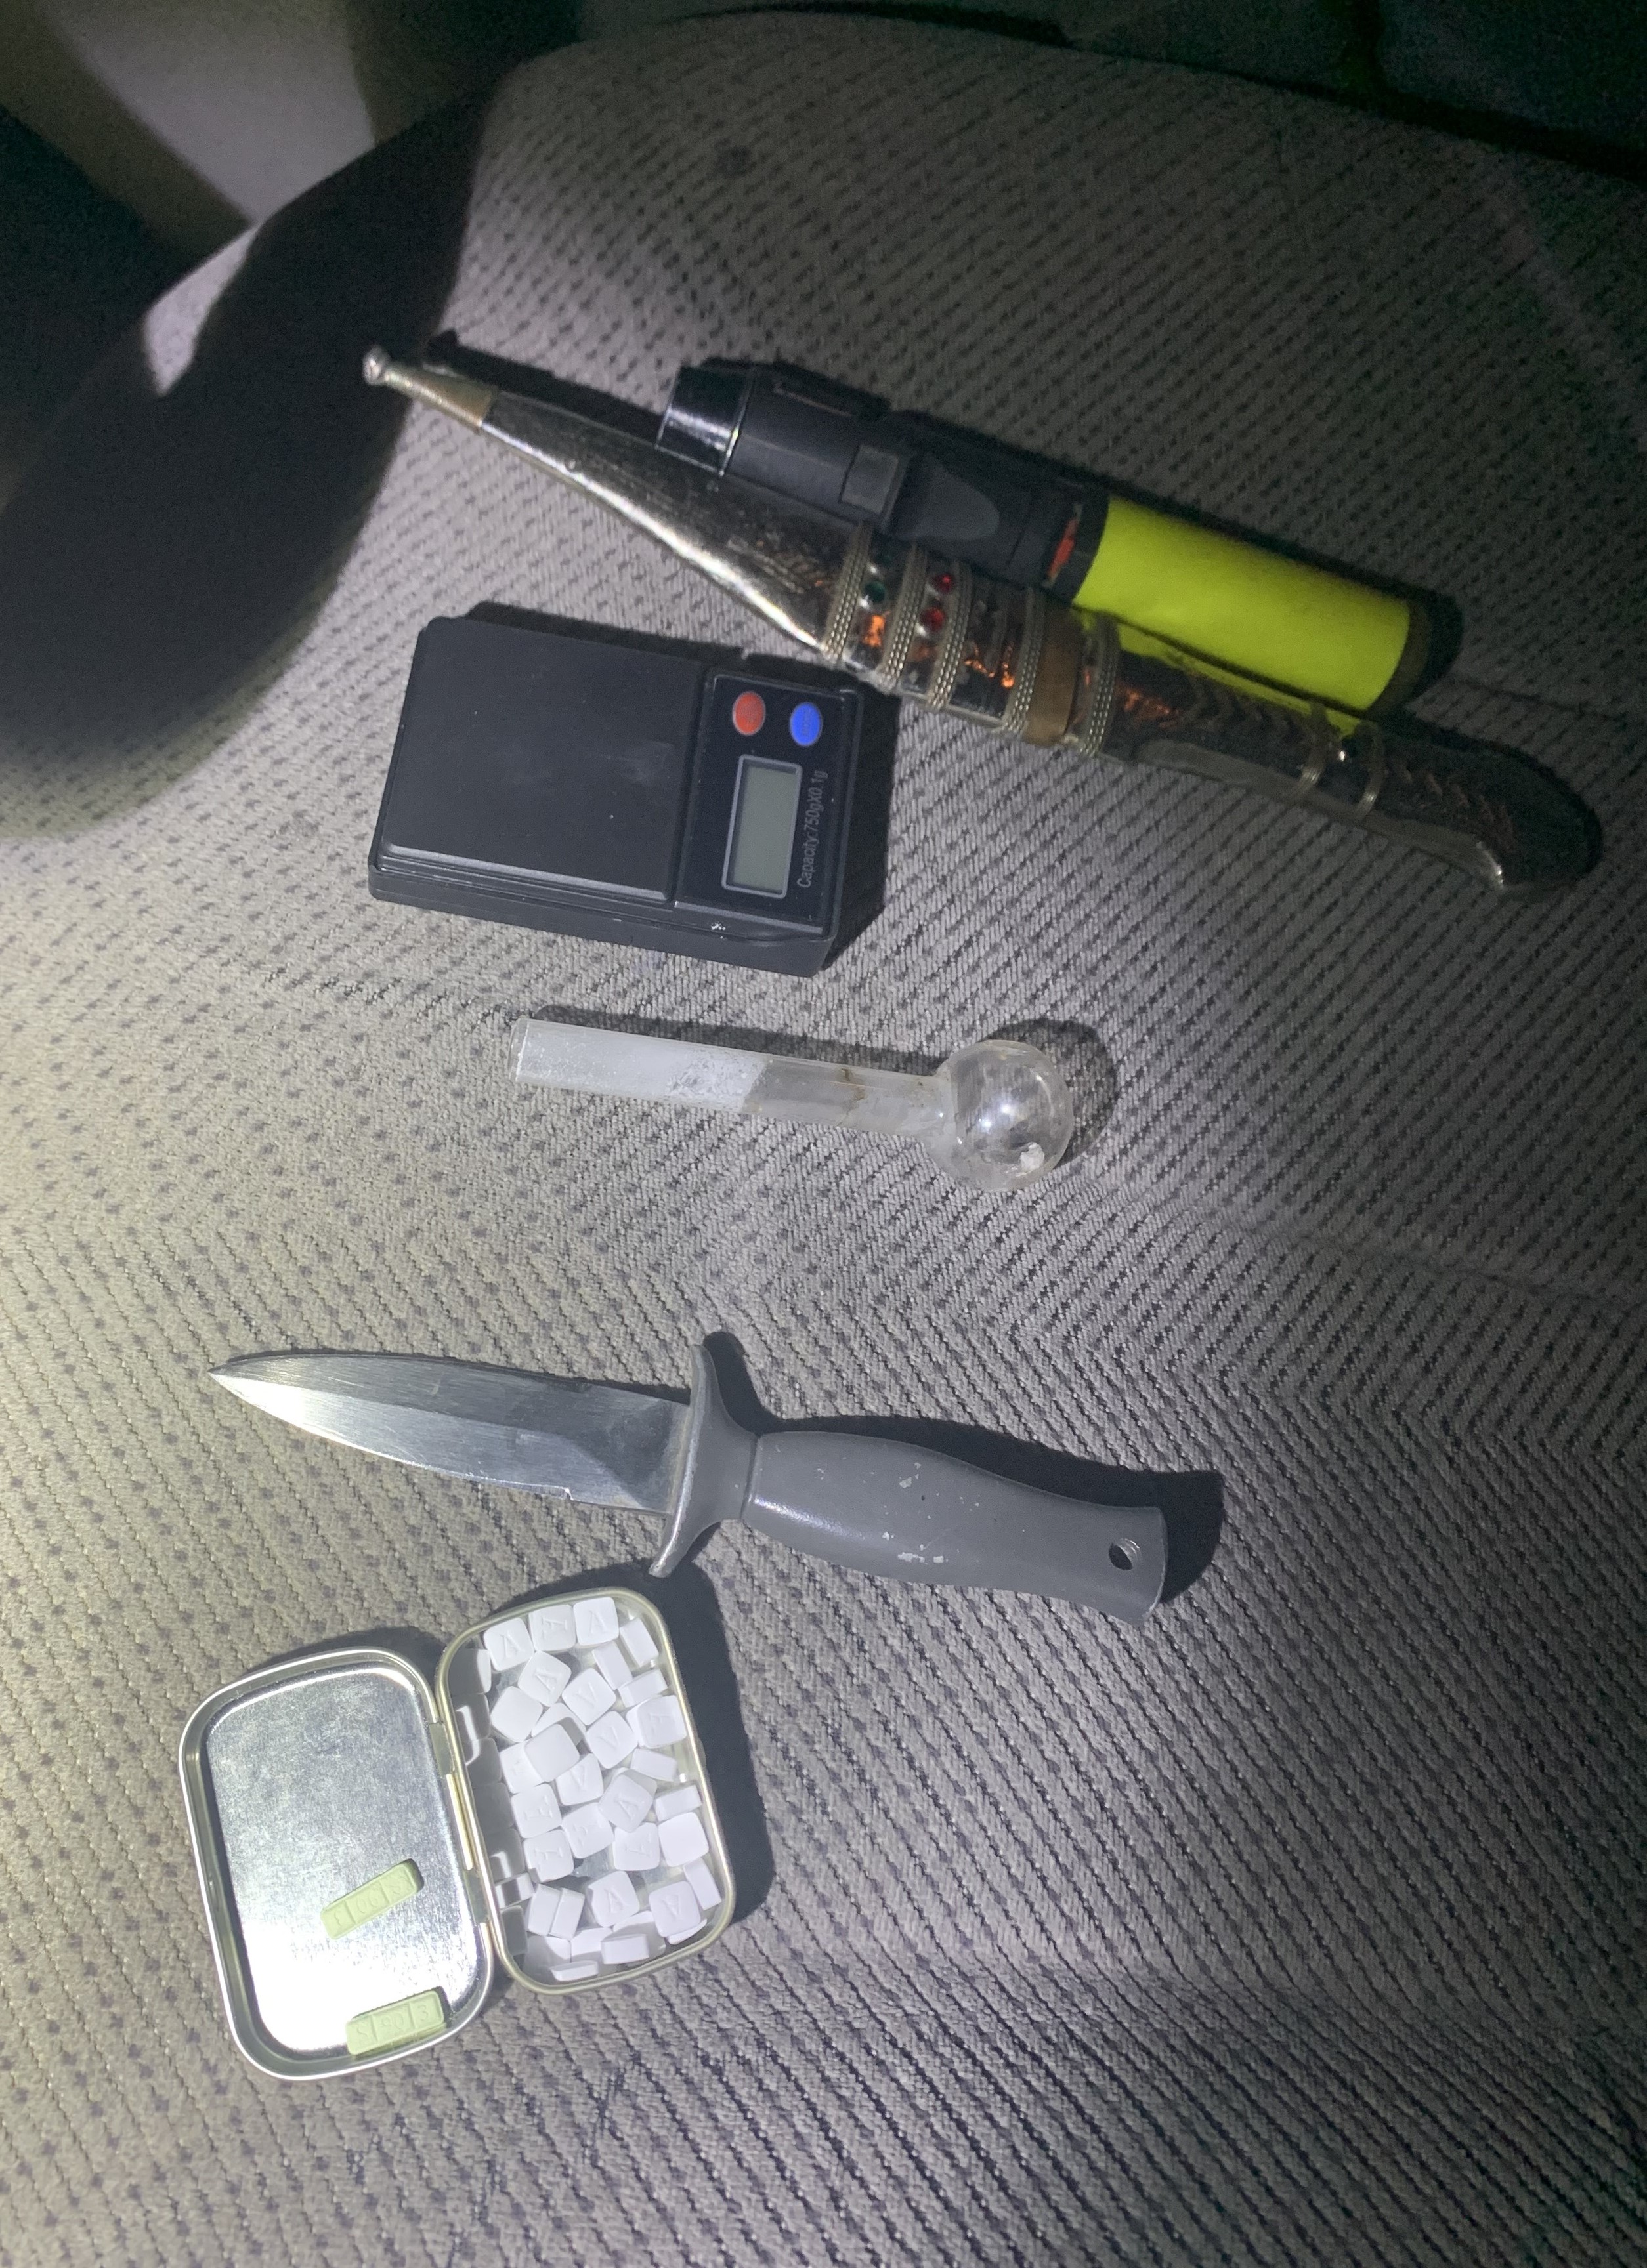 Report of man sleeping in truck leads to meth, heroin, concealed weapon arrest